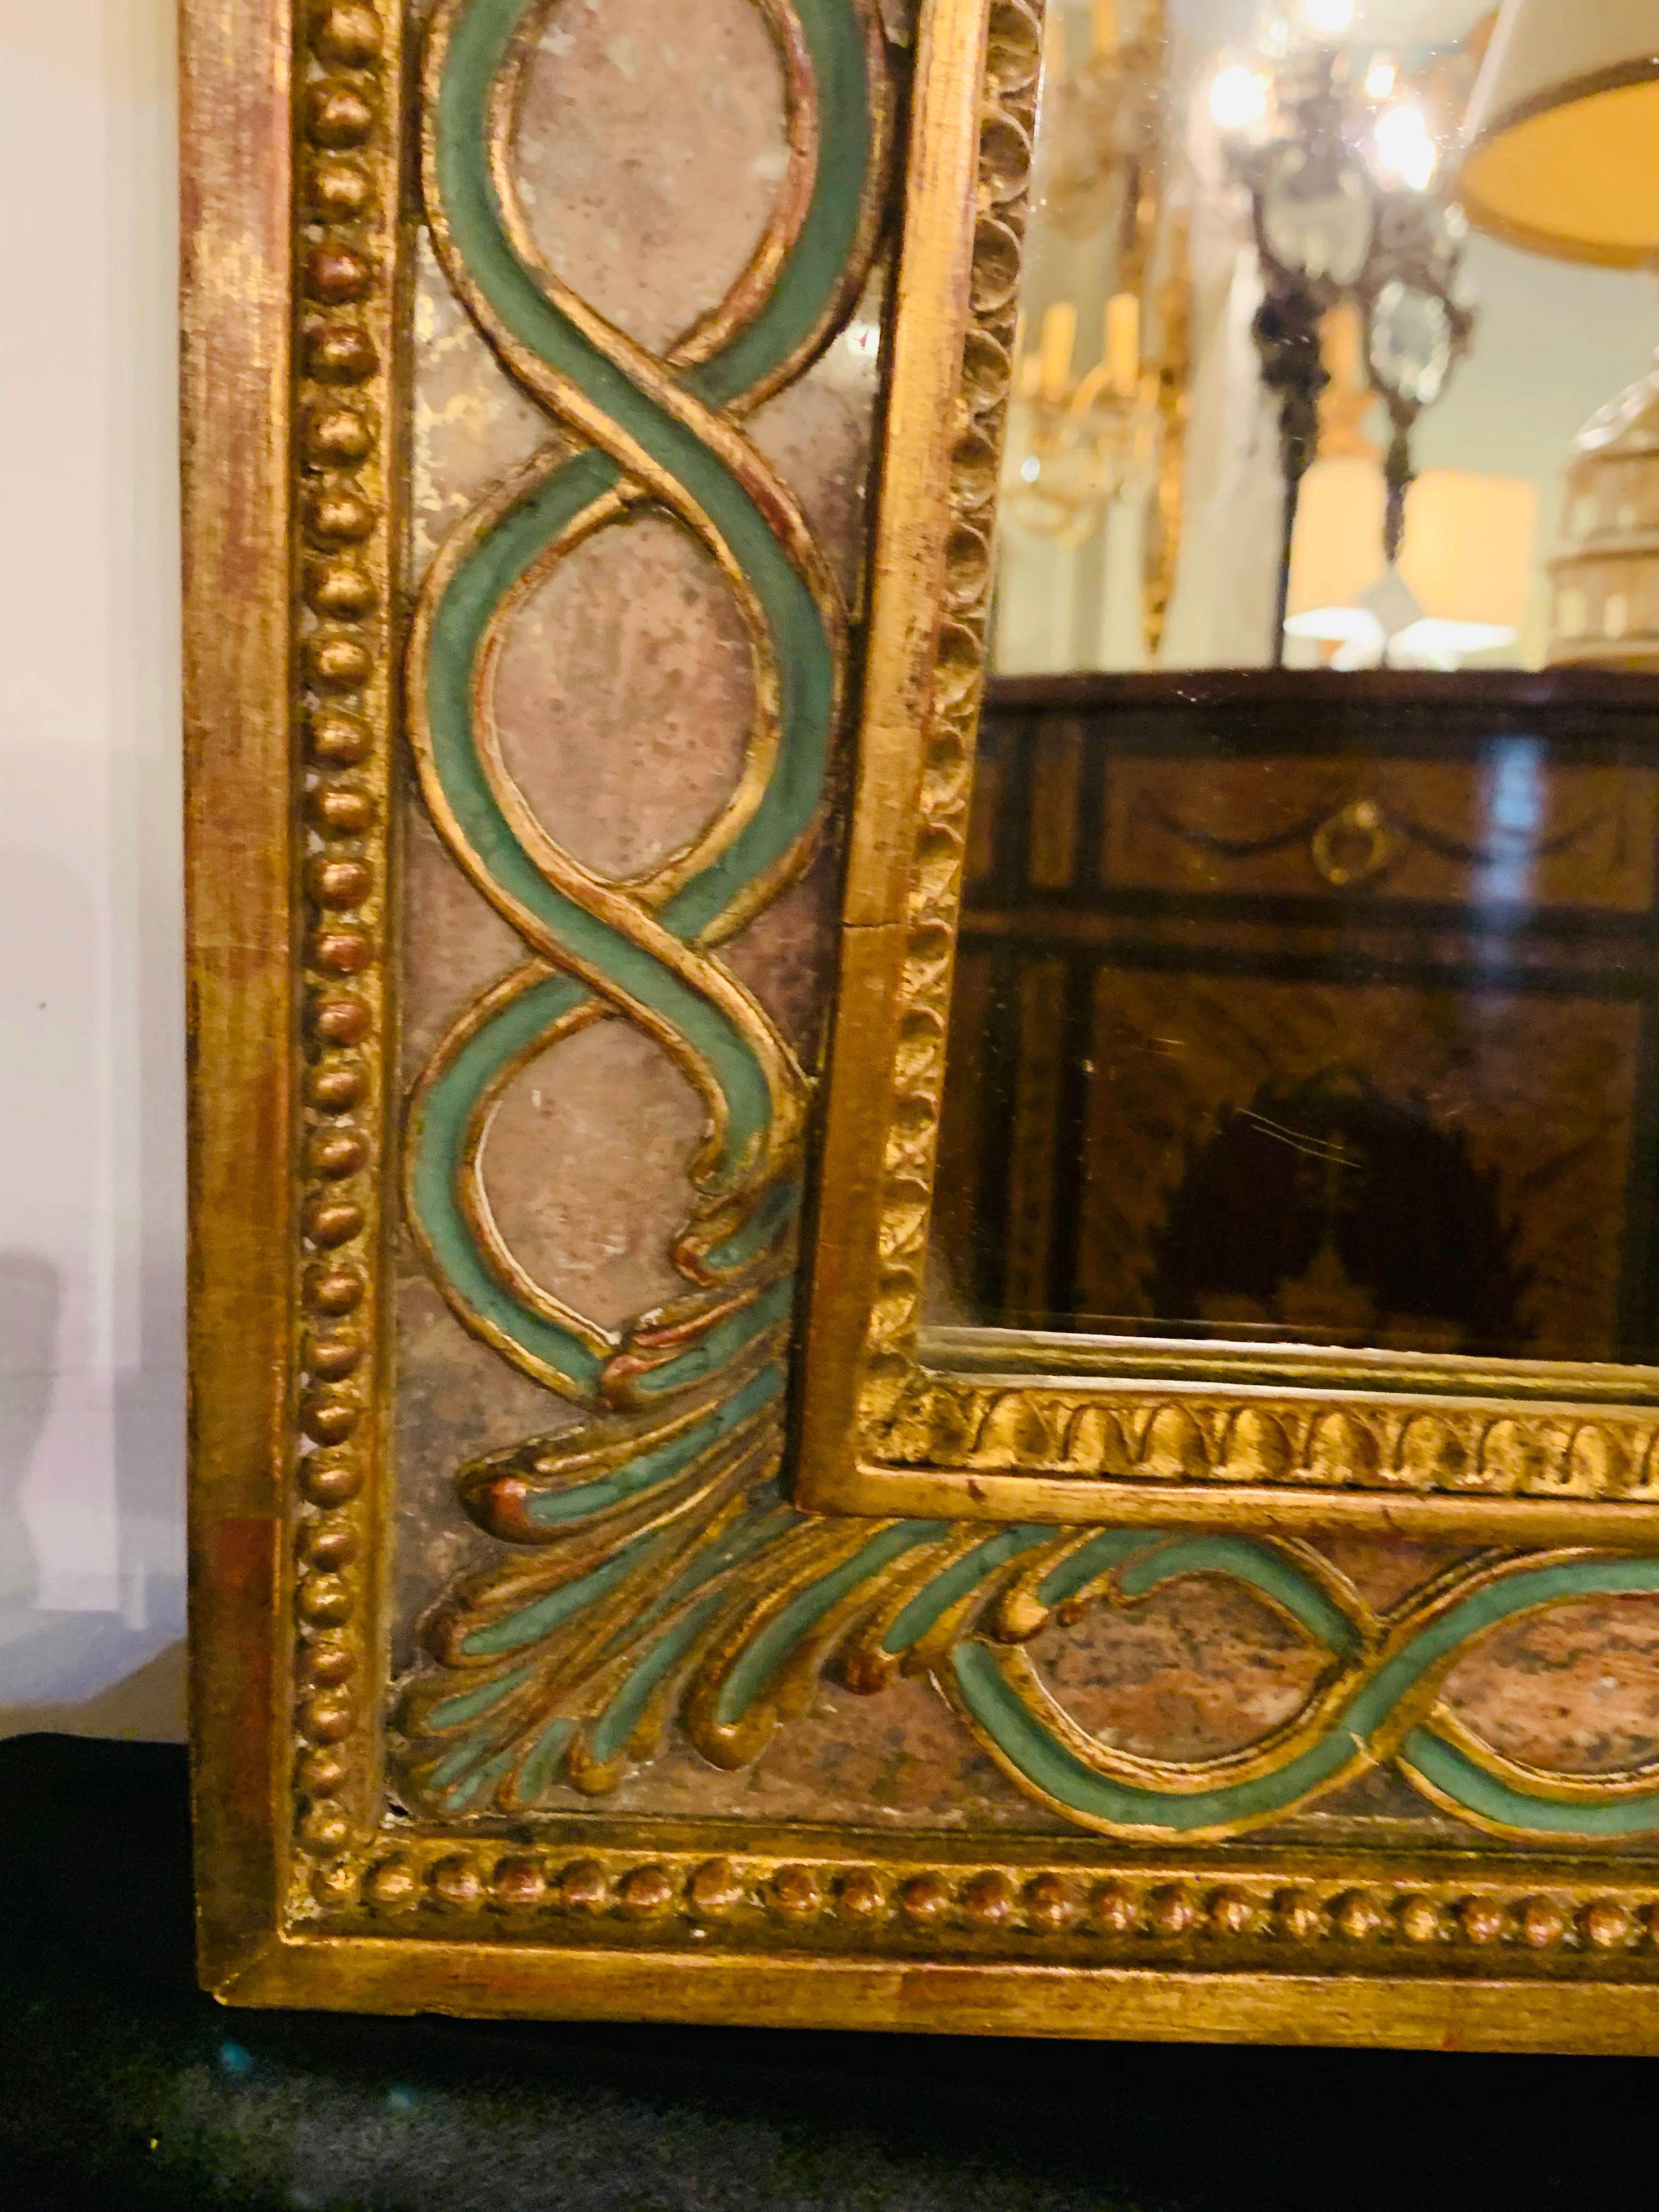 Italian wall or vanity mirror with antiqued giltwood and hand painted frame
This exquisite midcentury Italian mirror has a beautiful frame featuring antiqued mirror panel and hand carved giltwood finely painted in green. The mirror can be used as a